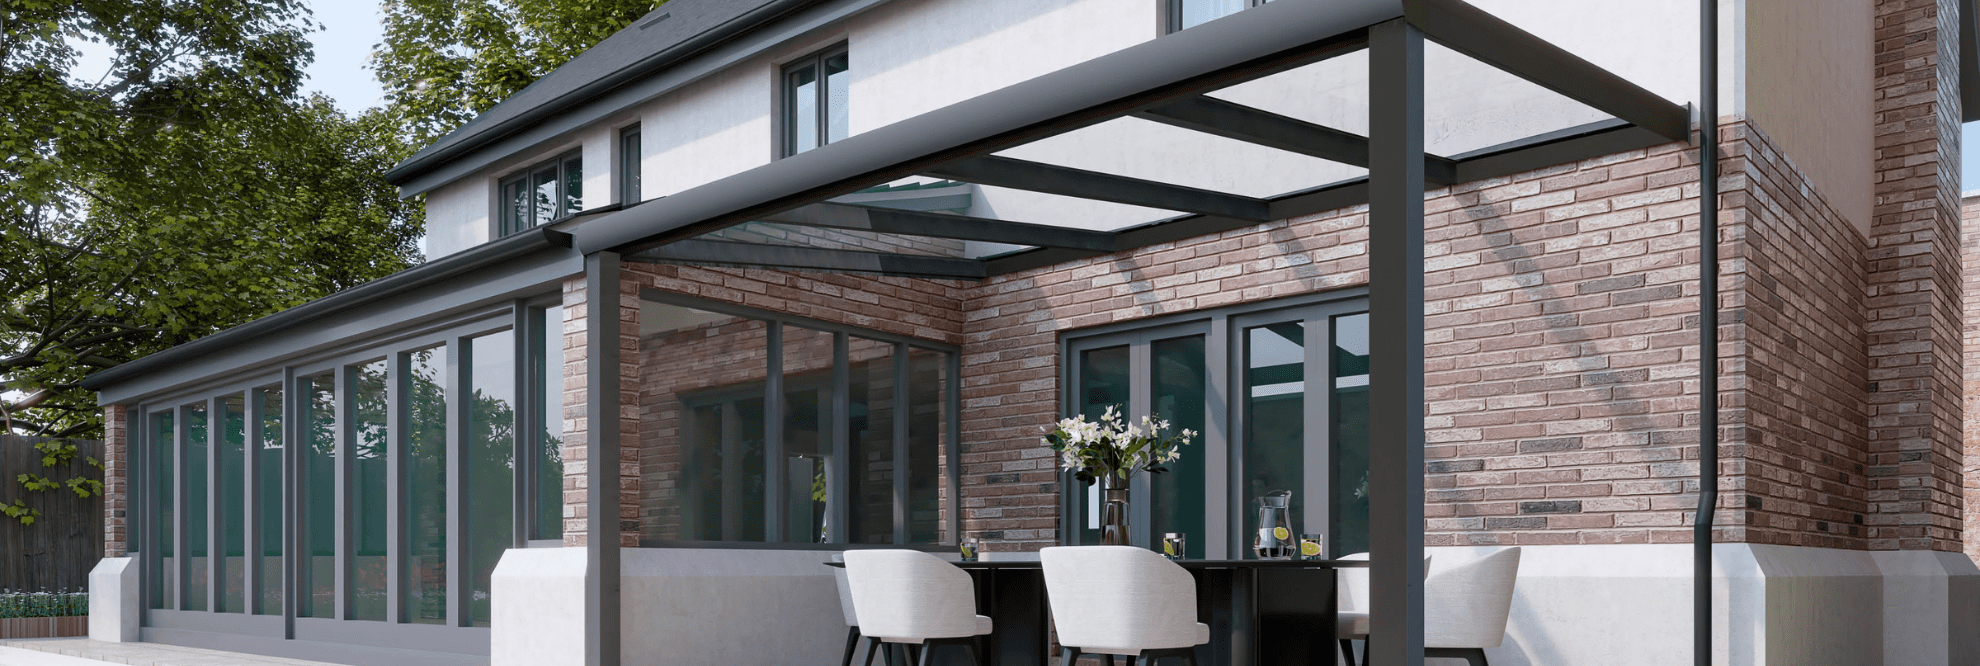 Enjoy the outdoors while staying protected with these stylish glass canopies. Perfect for modern homes, they provide shade and shelter for your outdoor furniture.